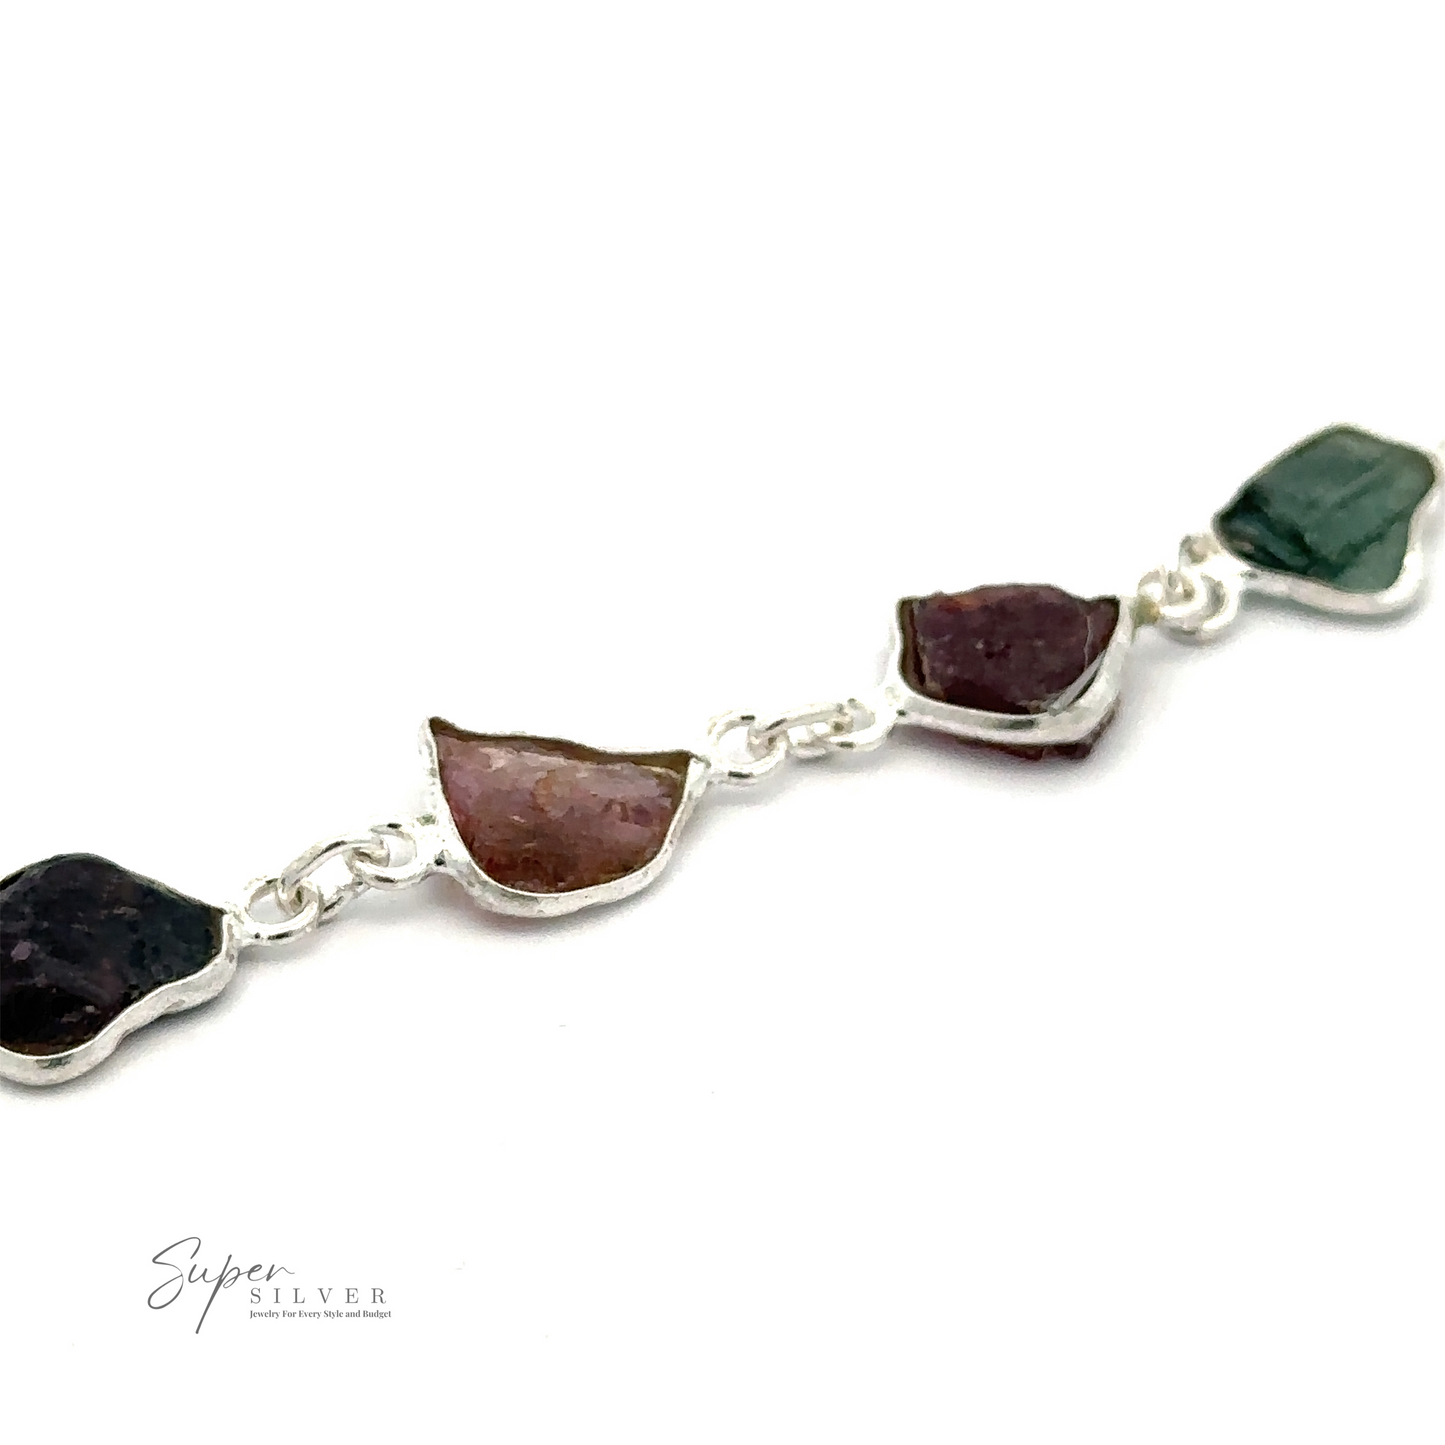 
                  
                    A Rough Tourmaline Bracelet featuring irregularly shaped, earthy elegance with multicolored rough tourmaline stones linked together. The stones vary in shades of green, purple, and pink. The logo "Super Silver" is visible in the bottom left corner.
                  
                